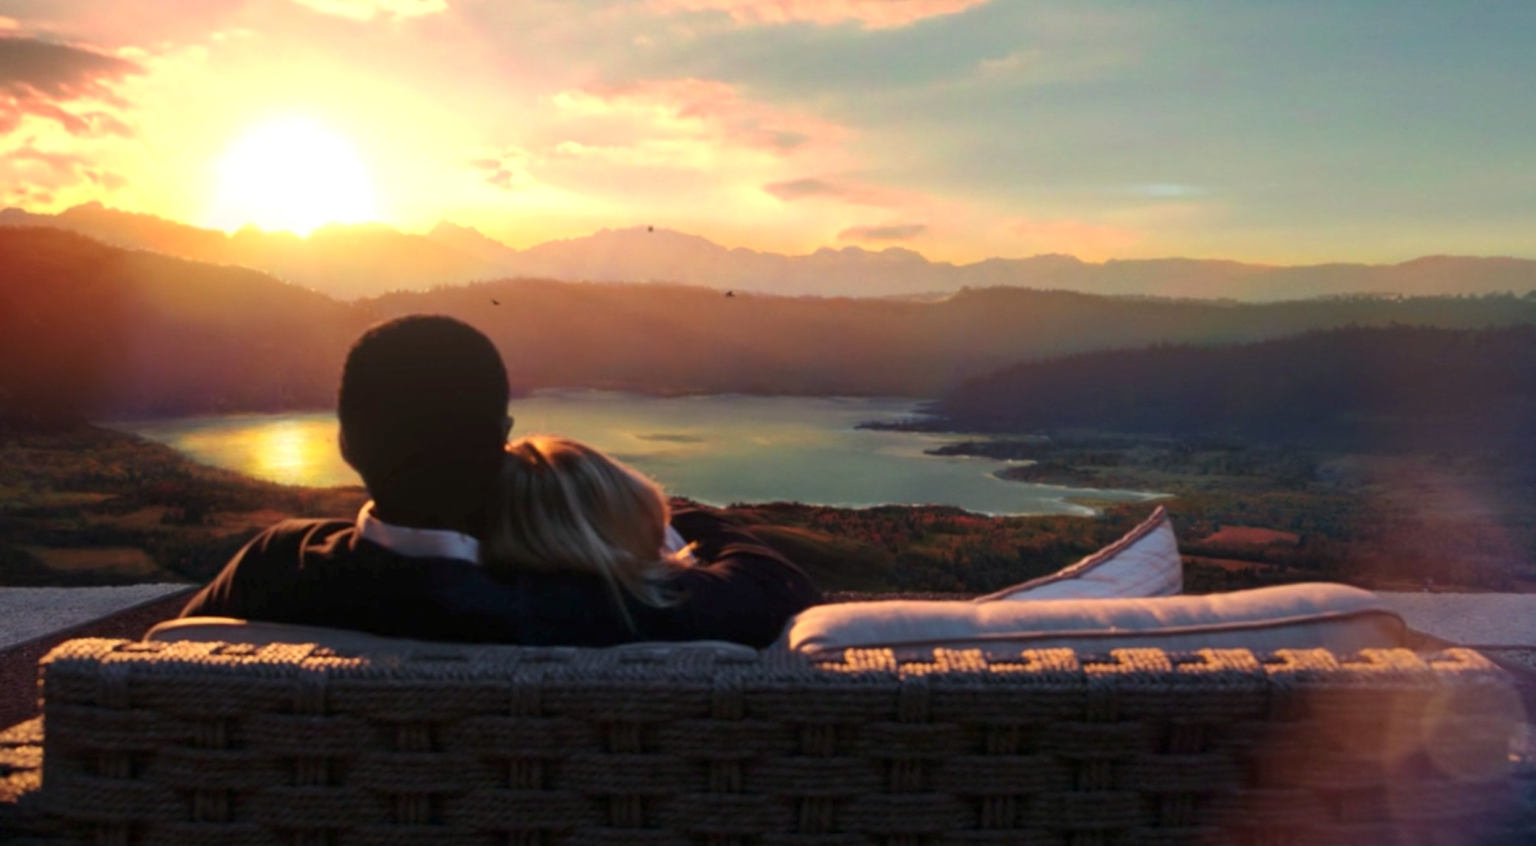 Eleanor and Chidi from The Good Place taking in a beautiful sunset